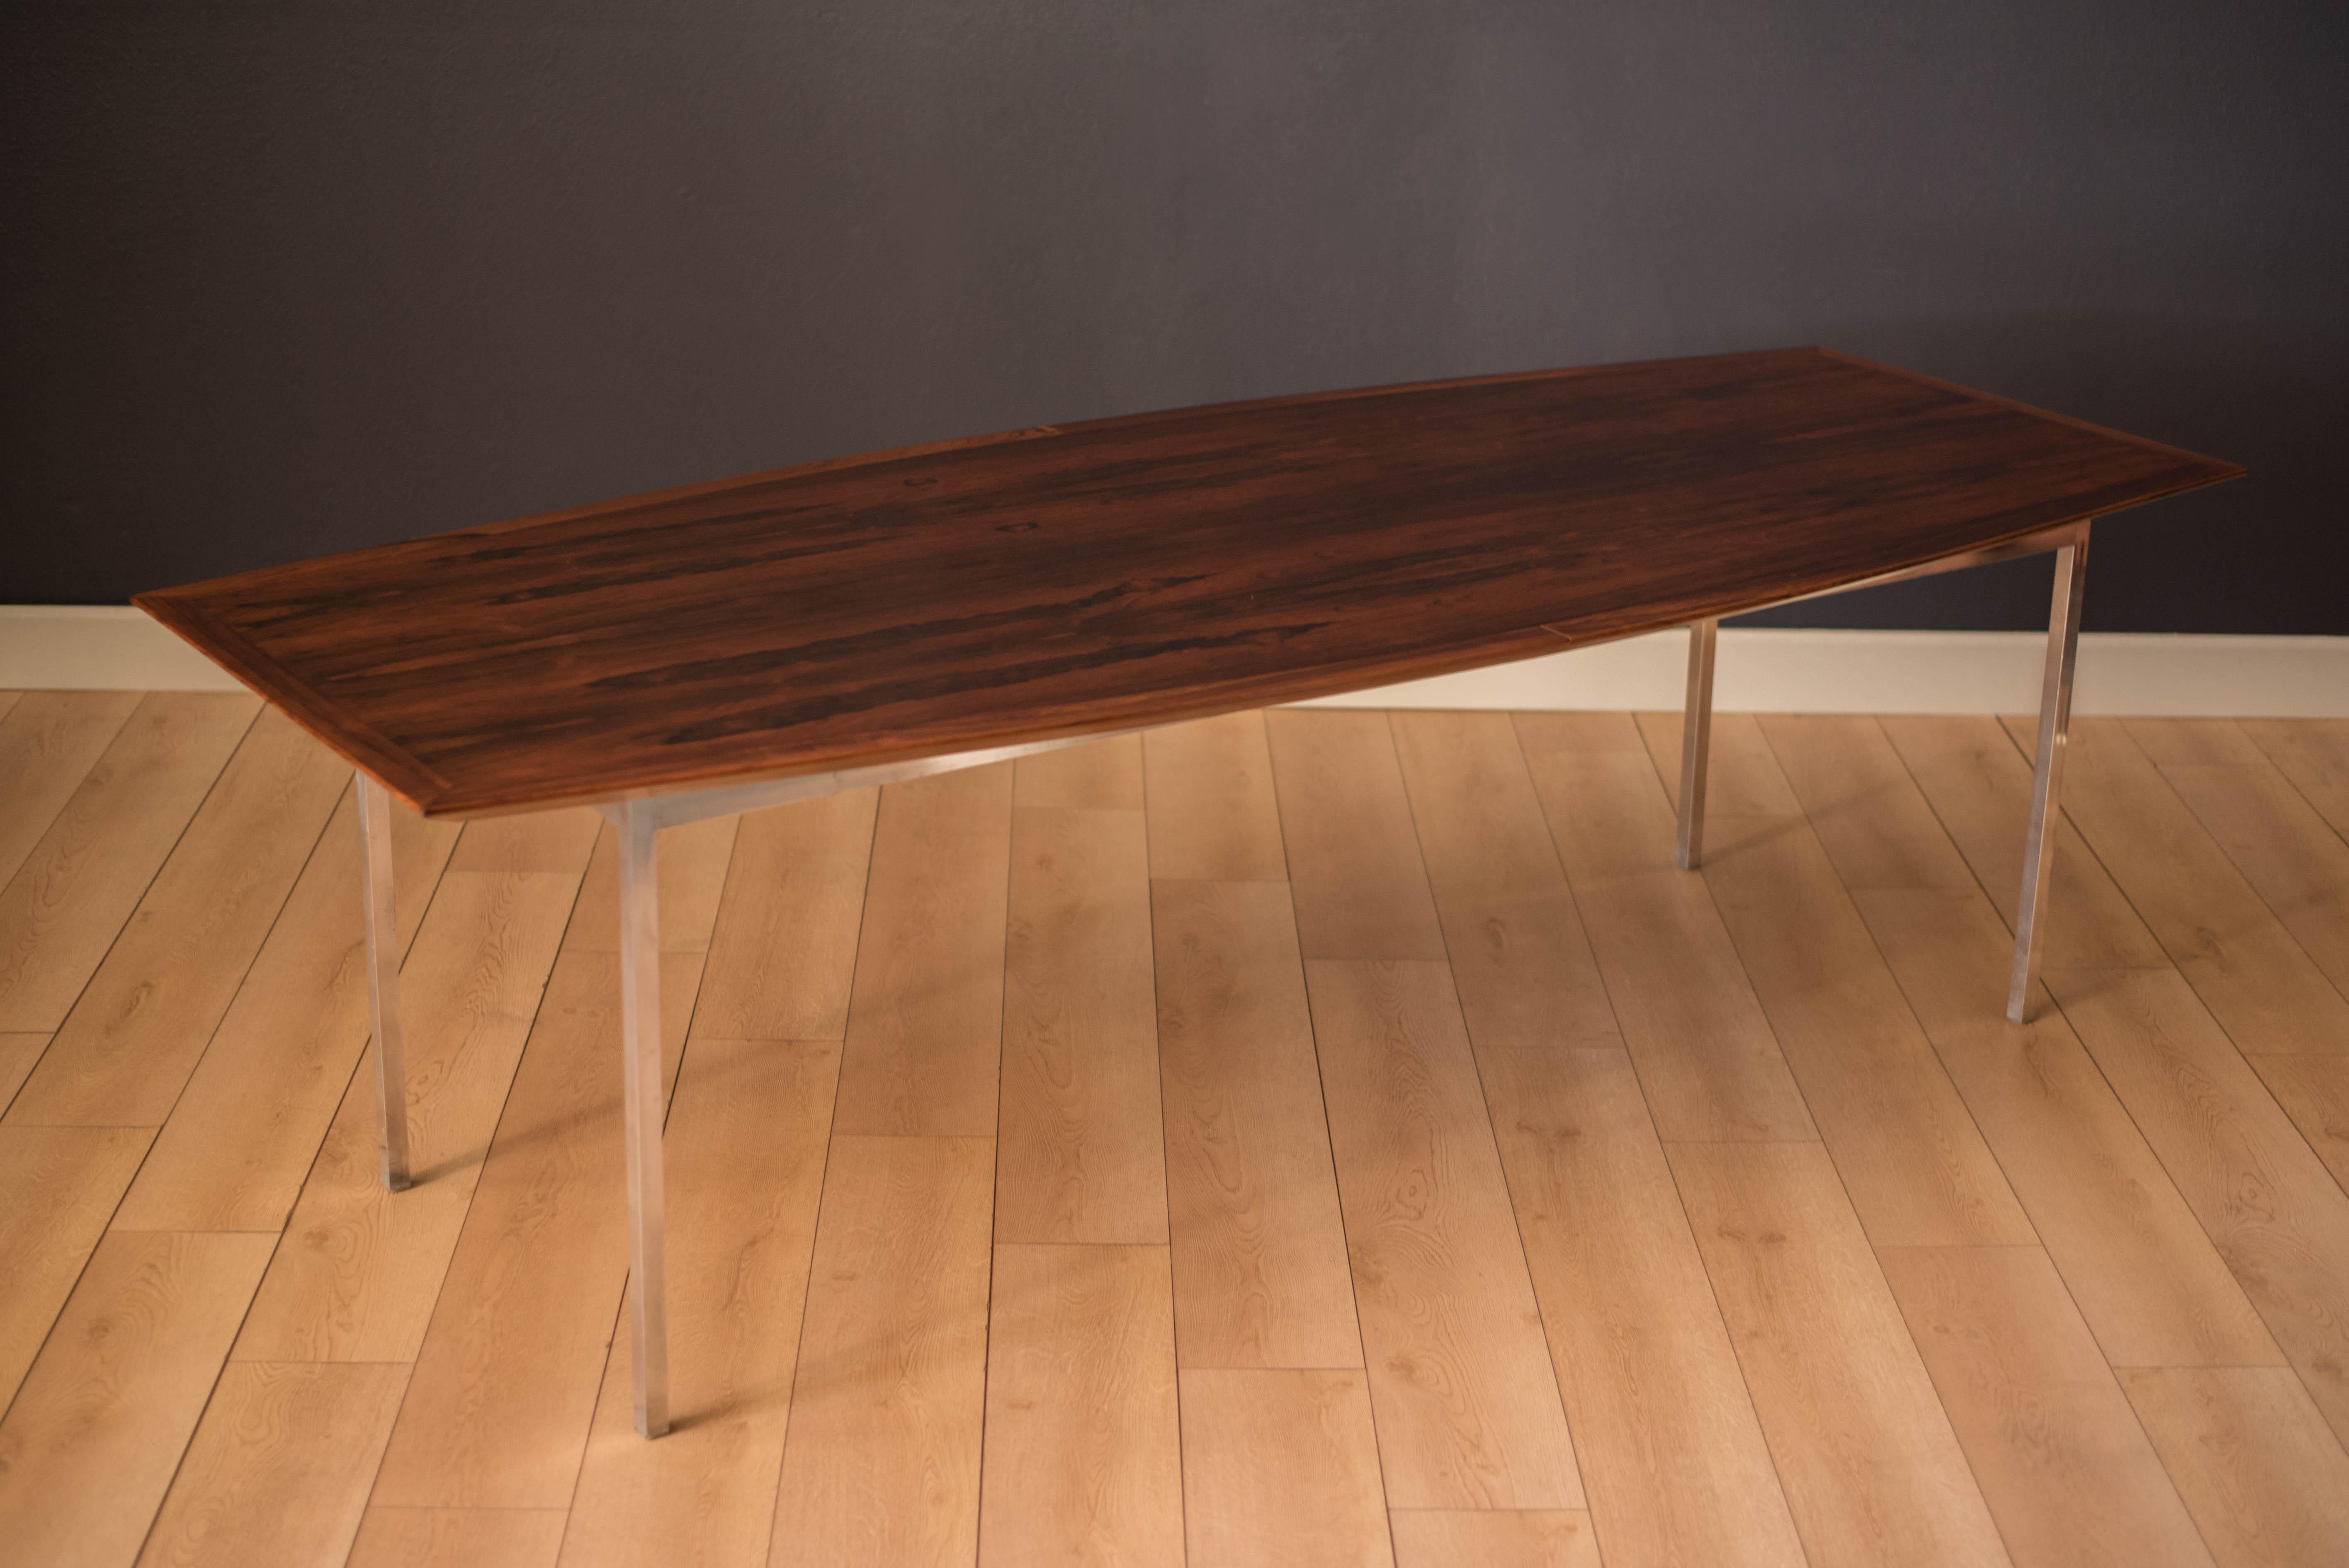 Vintage dining or conference table in Brazilian rosewood designed by Florence Knoll. This piece features a boat shaped tabletop supported by a rectangular steel base finished in polished chrome. Perfect for large gatherings and becomes a focal point